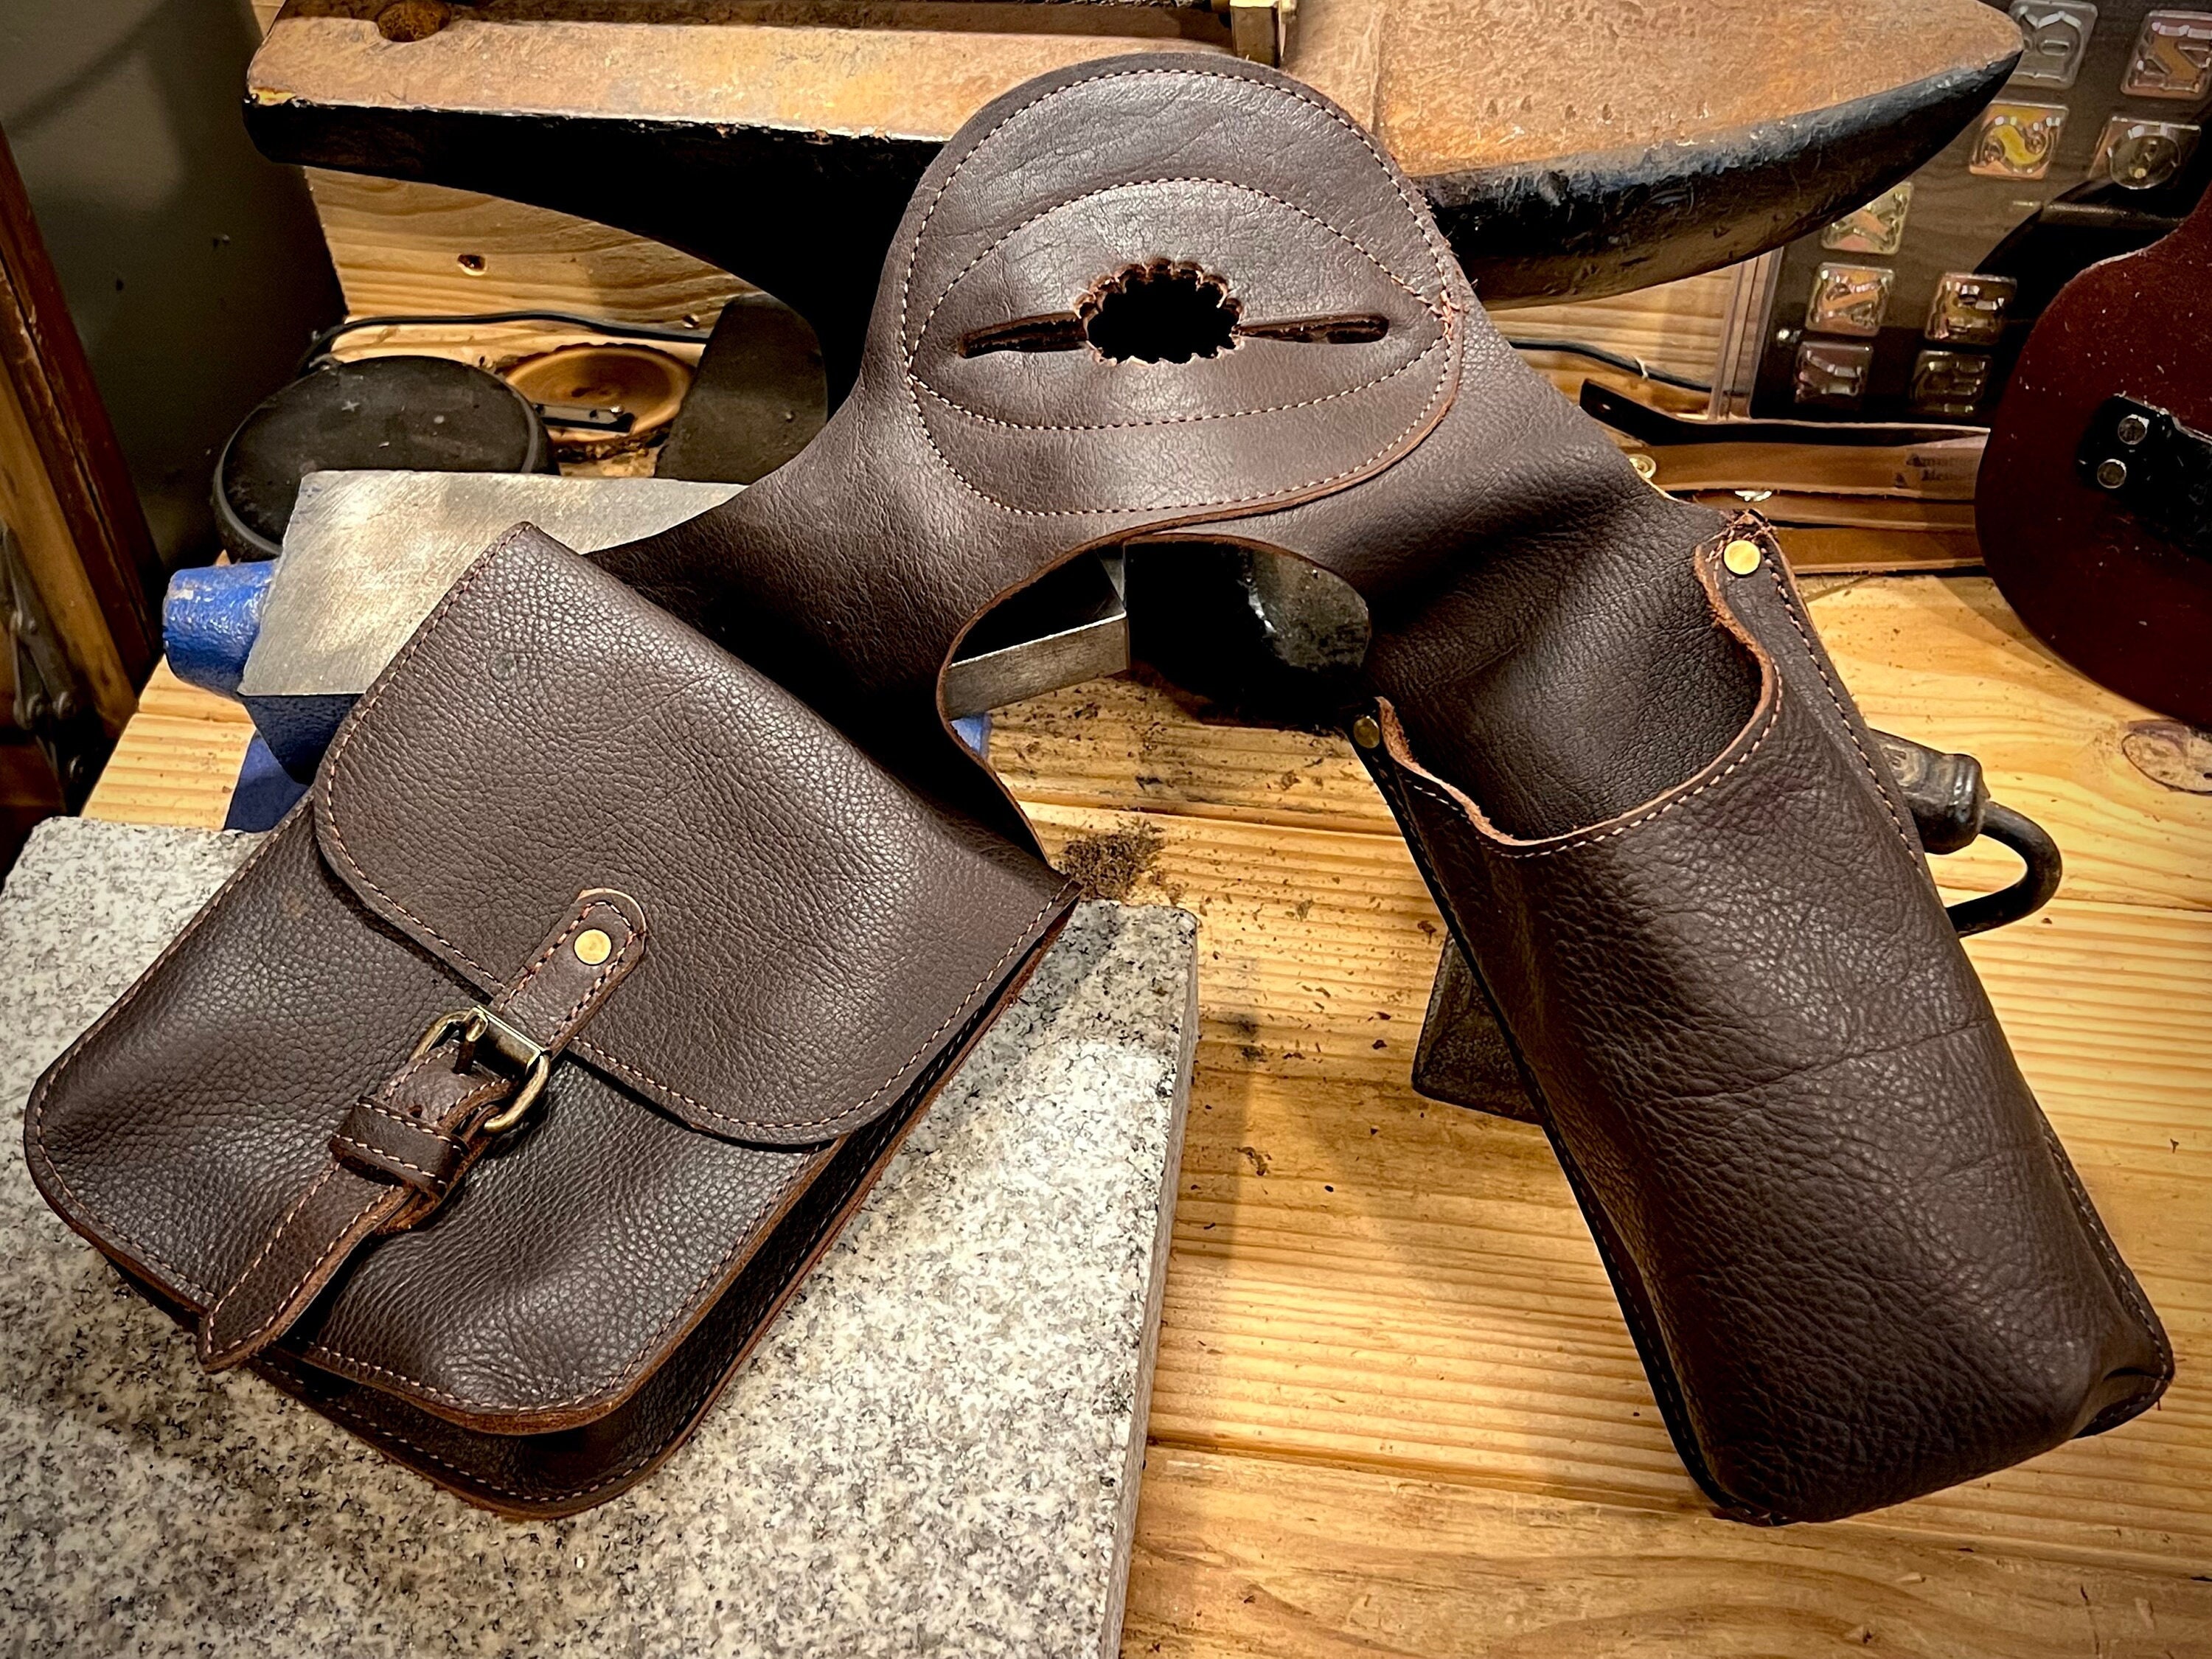 Leather Horn Bag with Bottle Holder and Phone Holder, Saddle Bag, Full Grain Buffalo Leather, Amish Handmade, Made in USA, Free Shipping